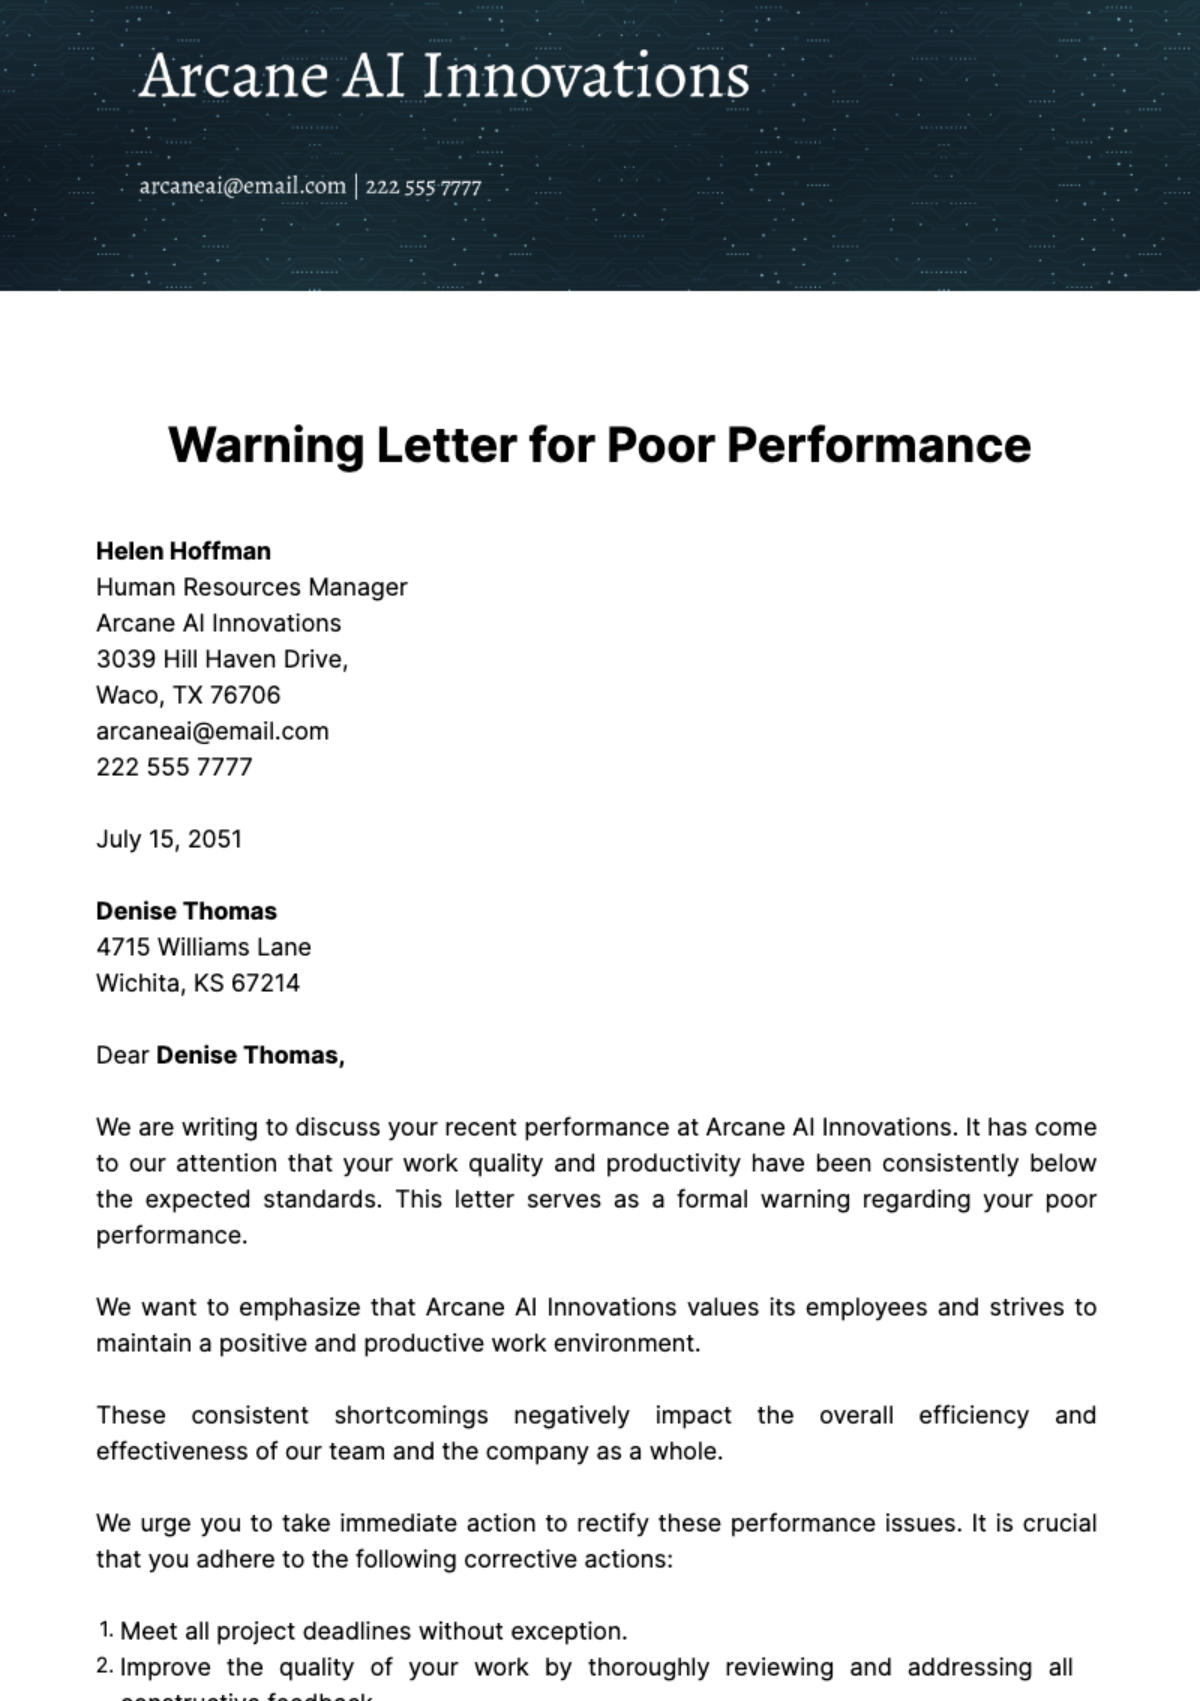 Warning Letter for Poor Performance Template